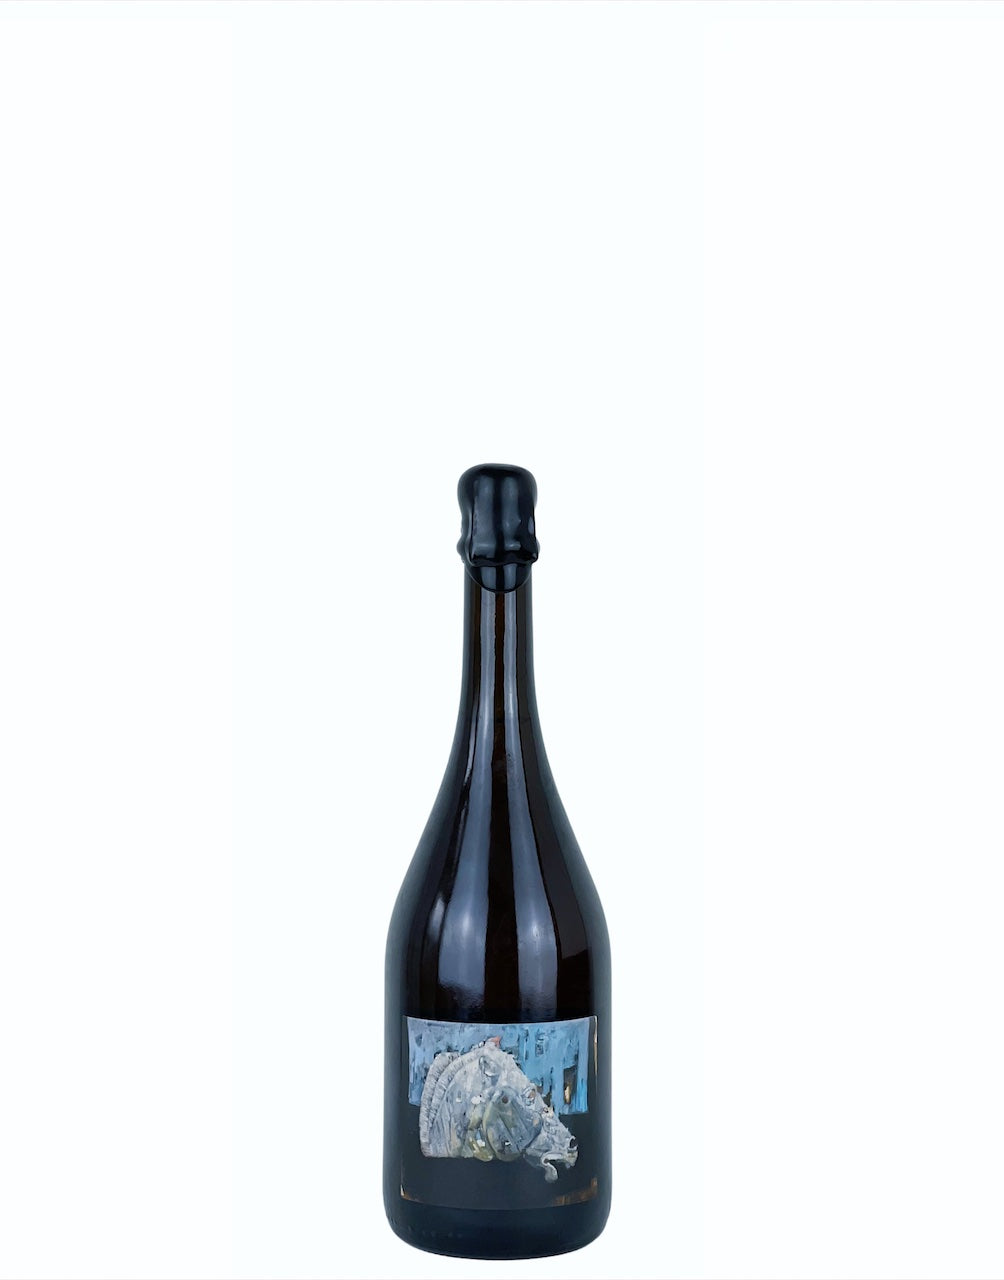 A bottle of Fine, a sparkling natural wine of Bergianti made with Lambrusco di Sorbara grapes.